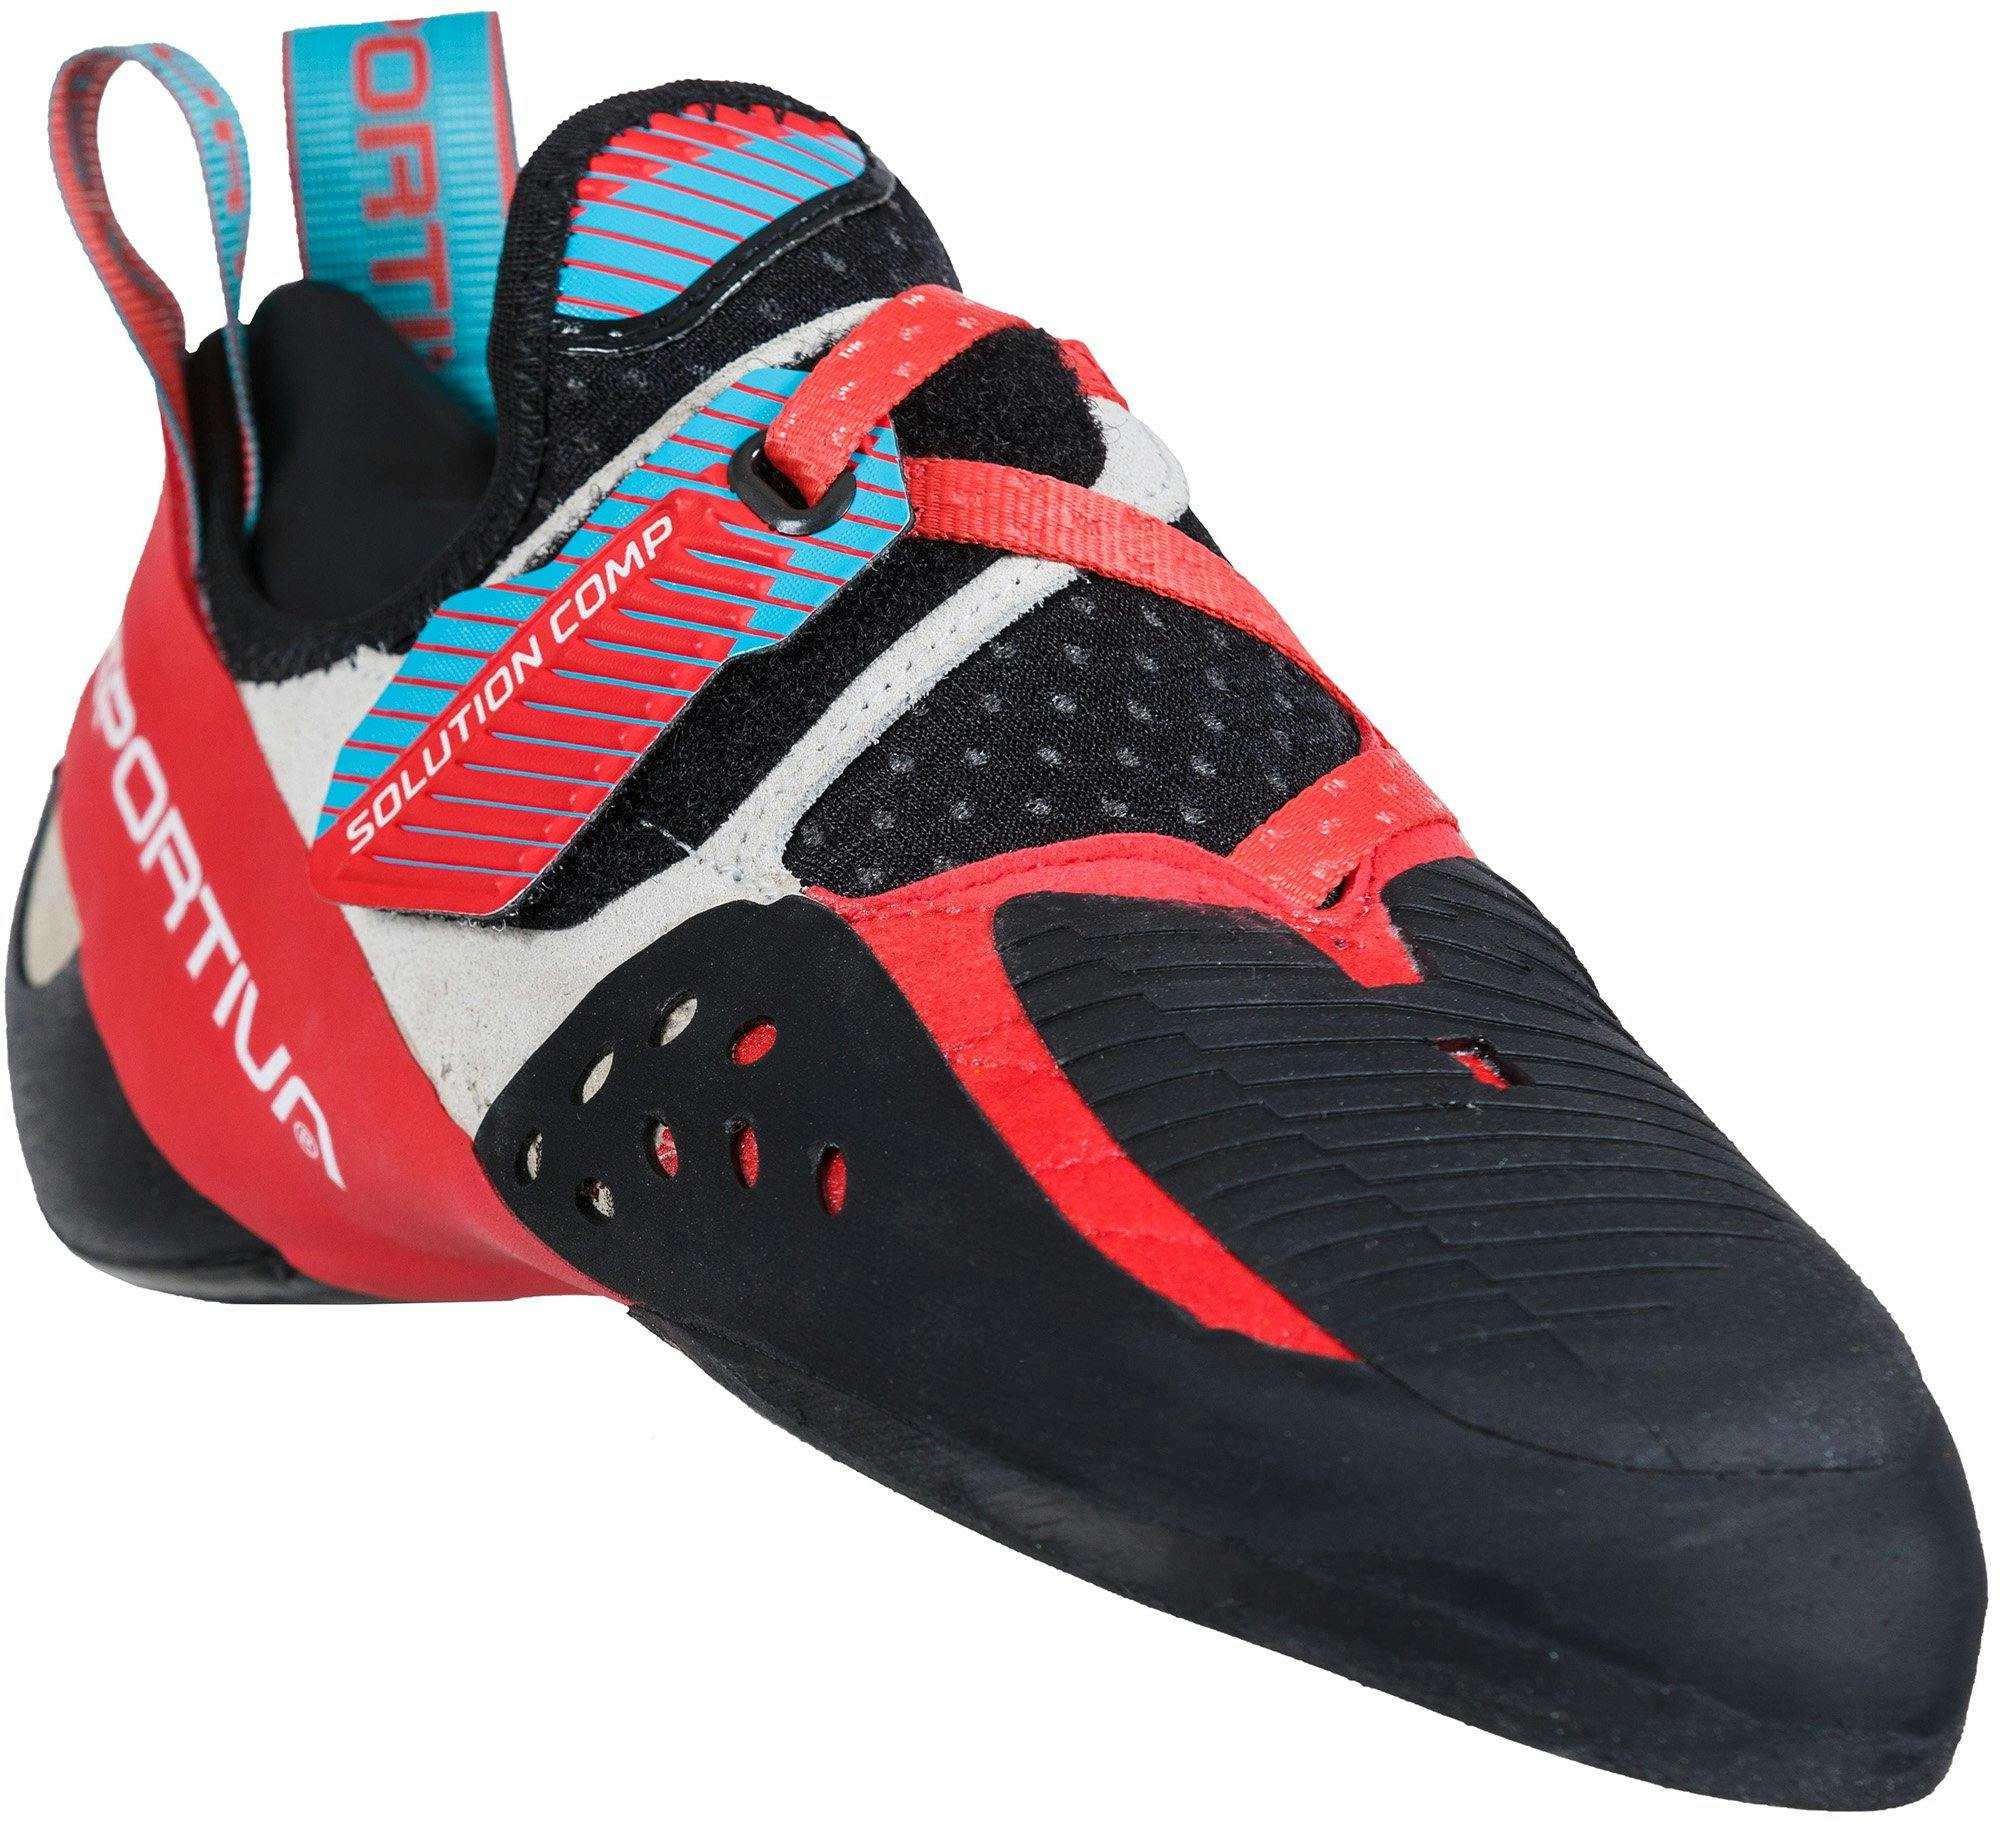 Product image for Solution Comp Climbing Shoes - Women's